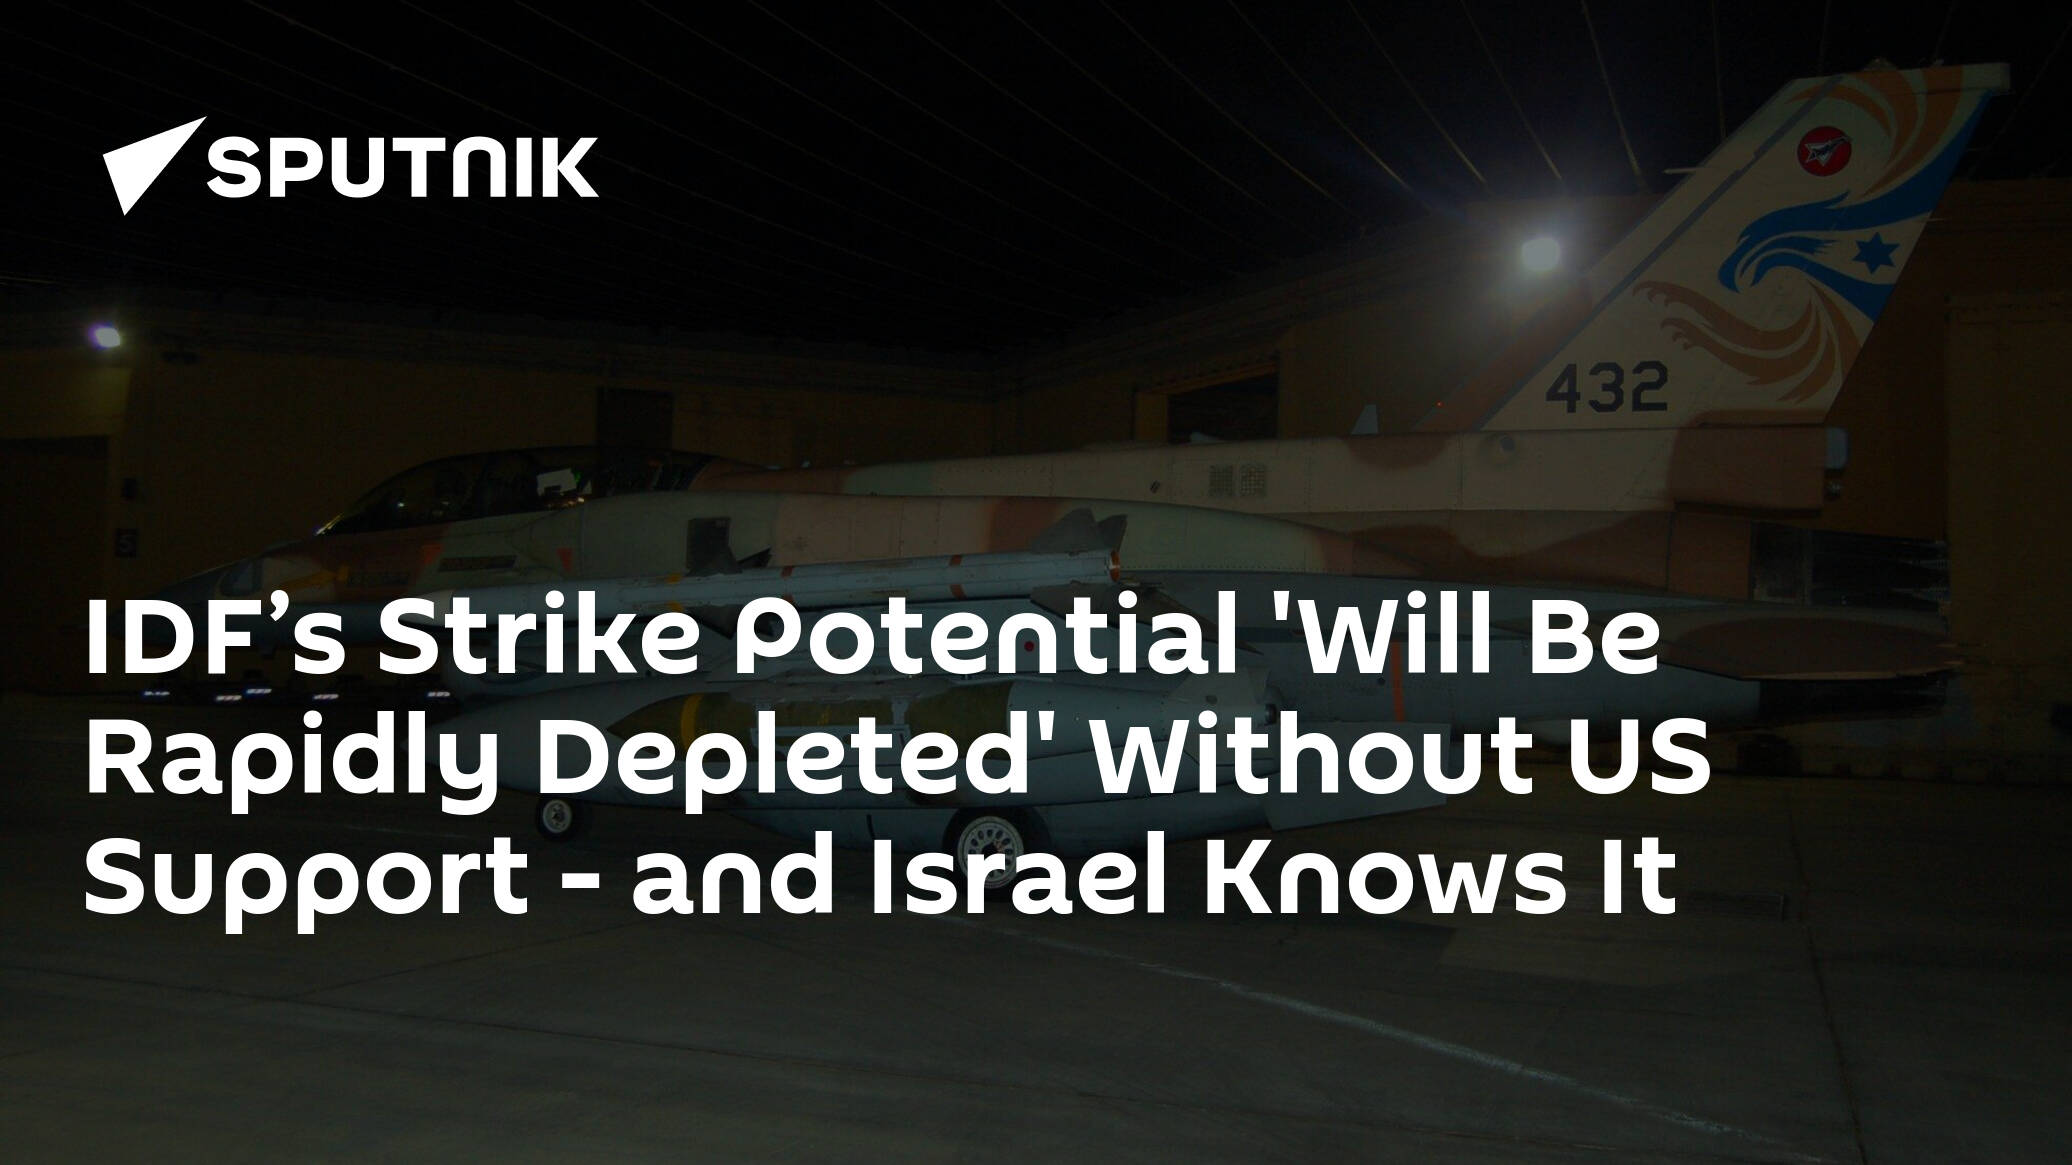 IDF’s Strike Potential 'Will Be Rapidly Depleted' Without US Support – and Israel Knows It